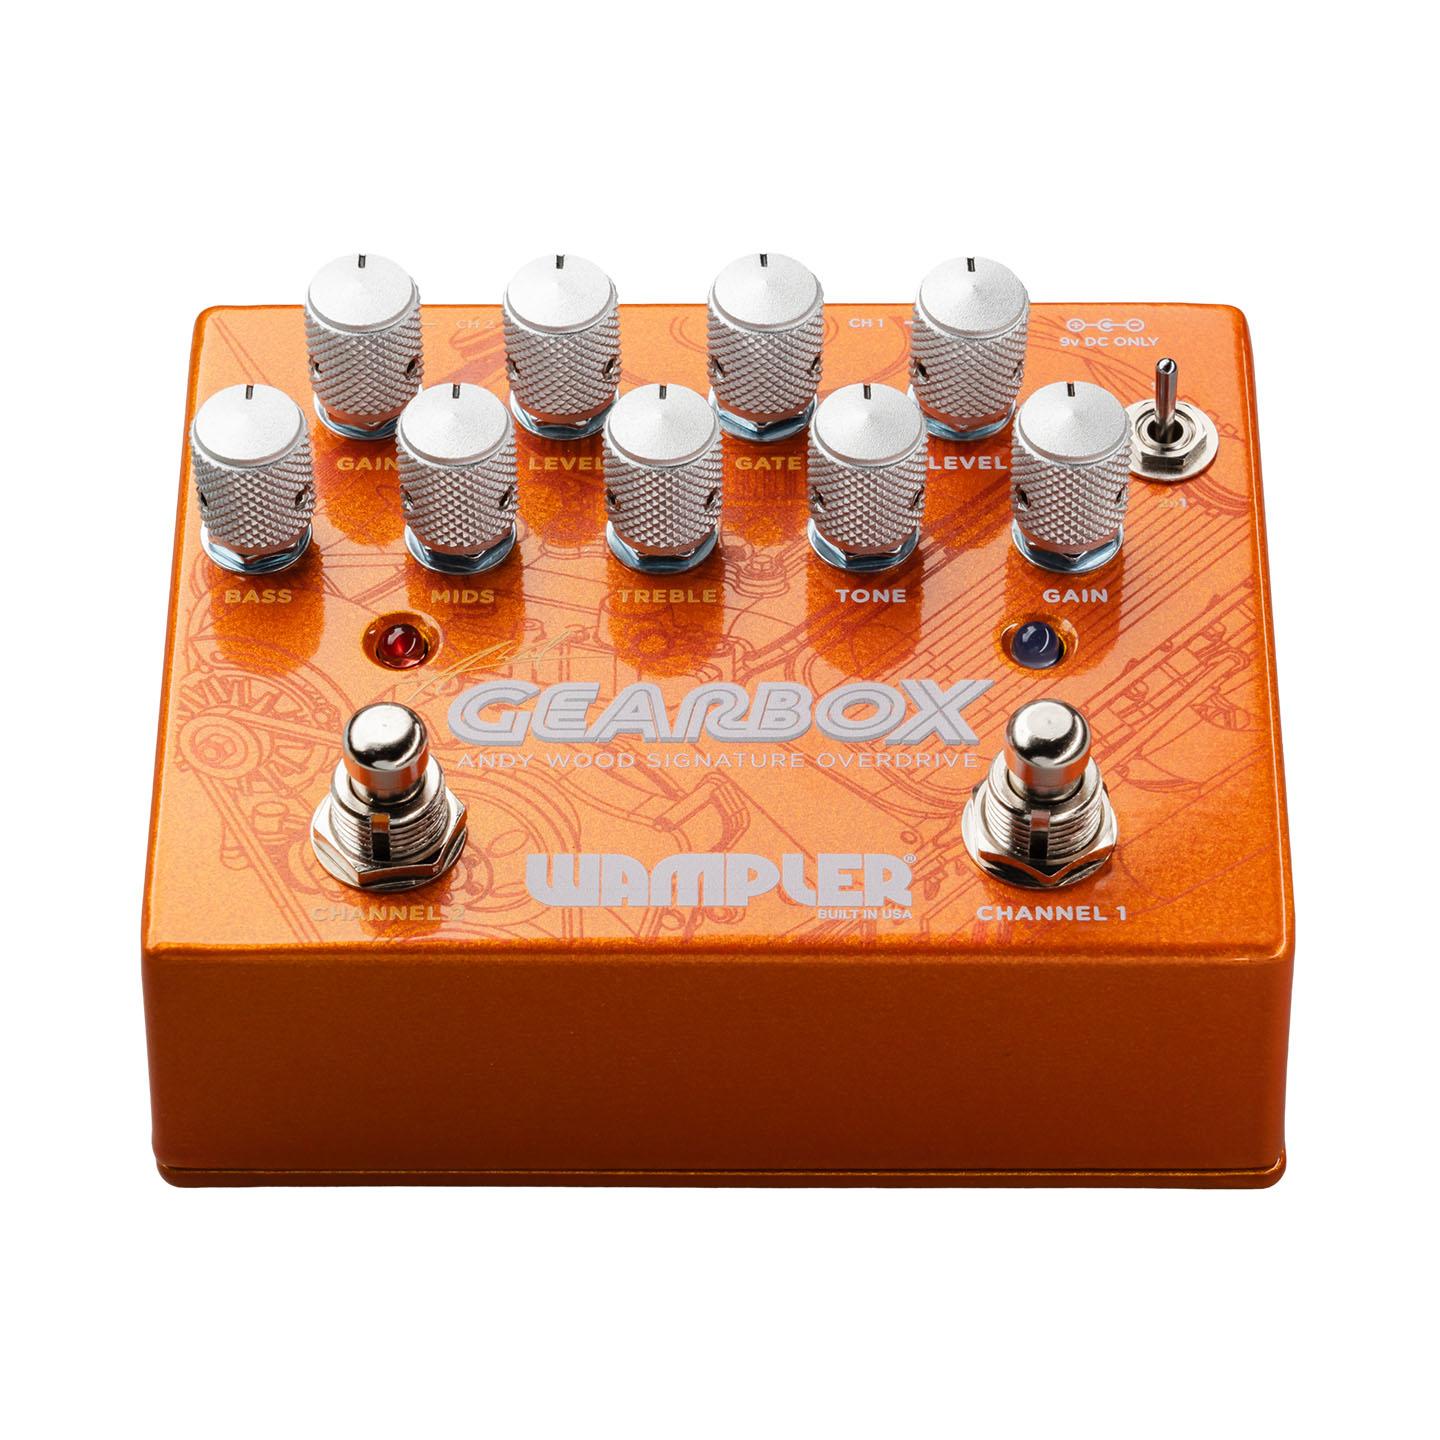 Andy Wood: Gearbox Pedal